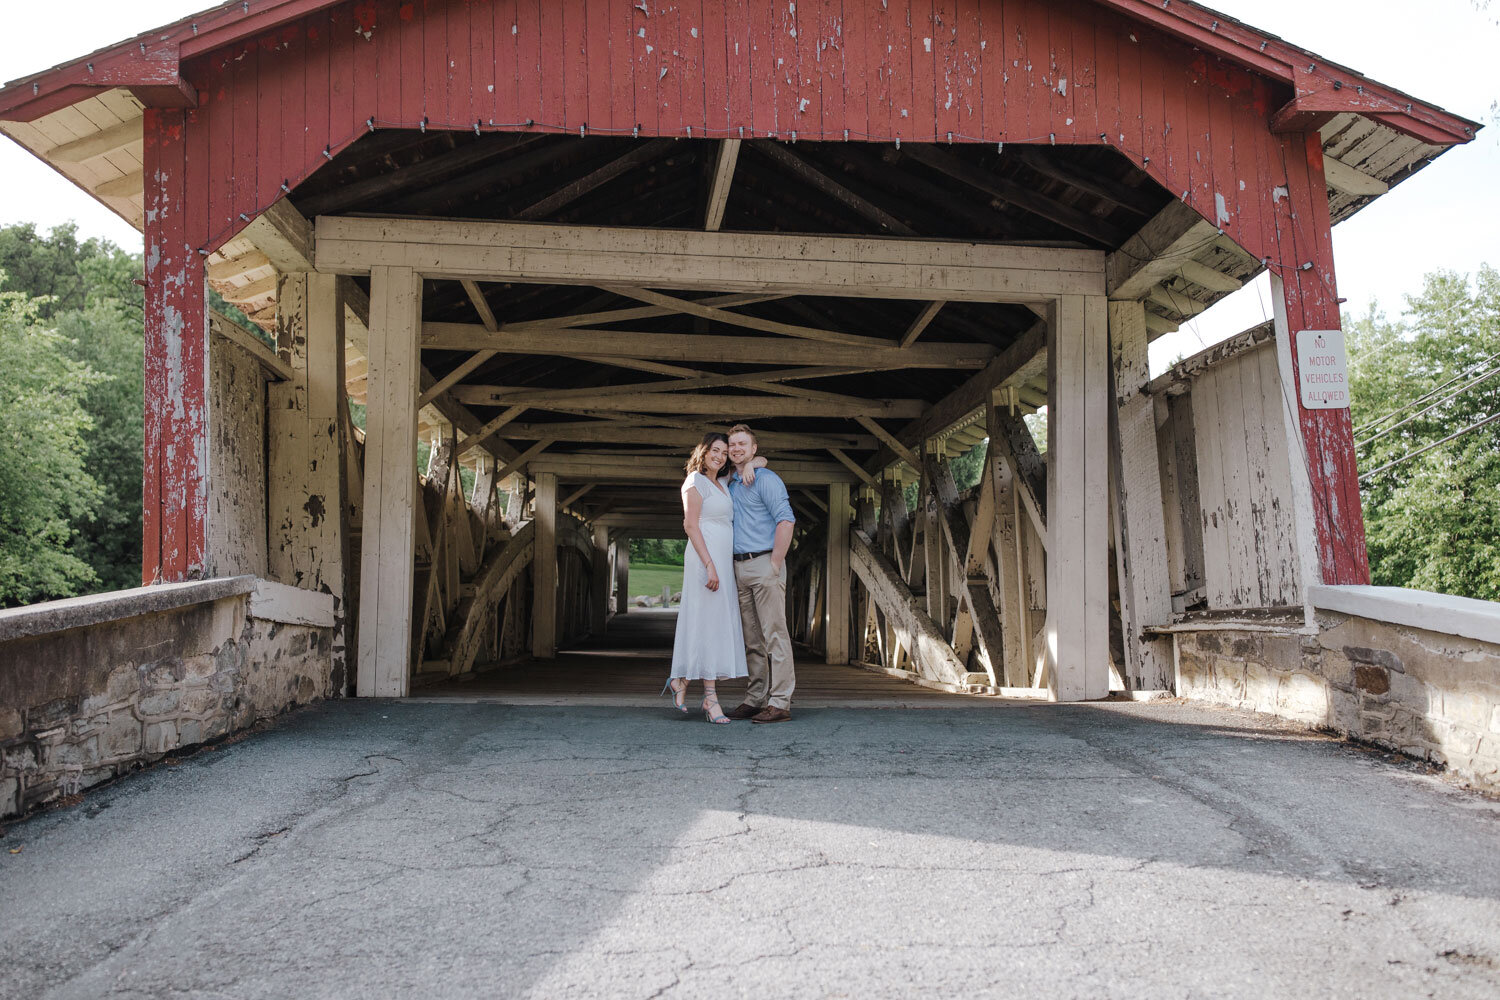 a couple in fron of a covered bridge on the lehigh valley parkway